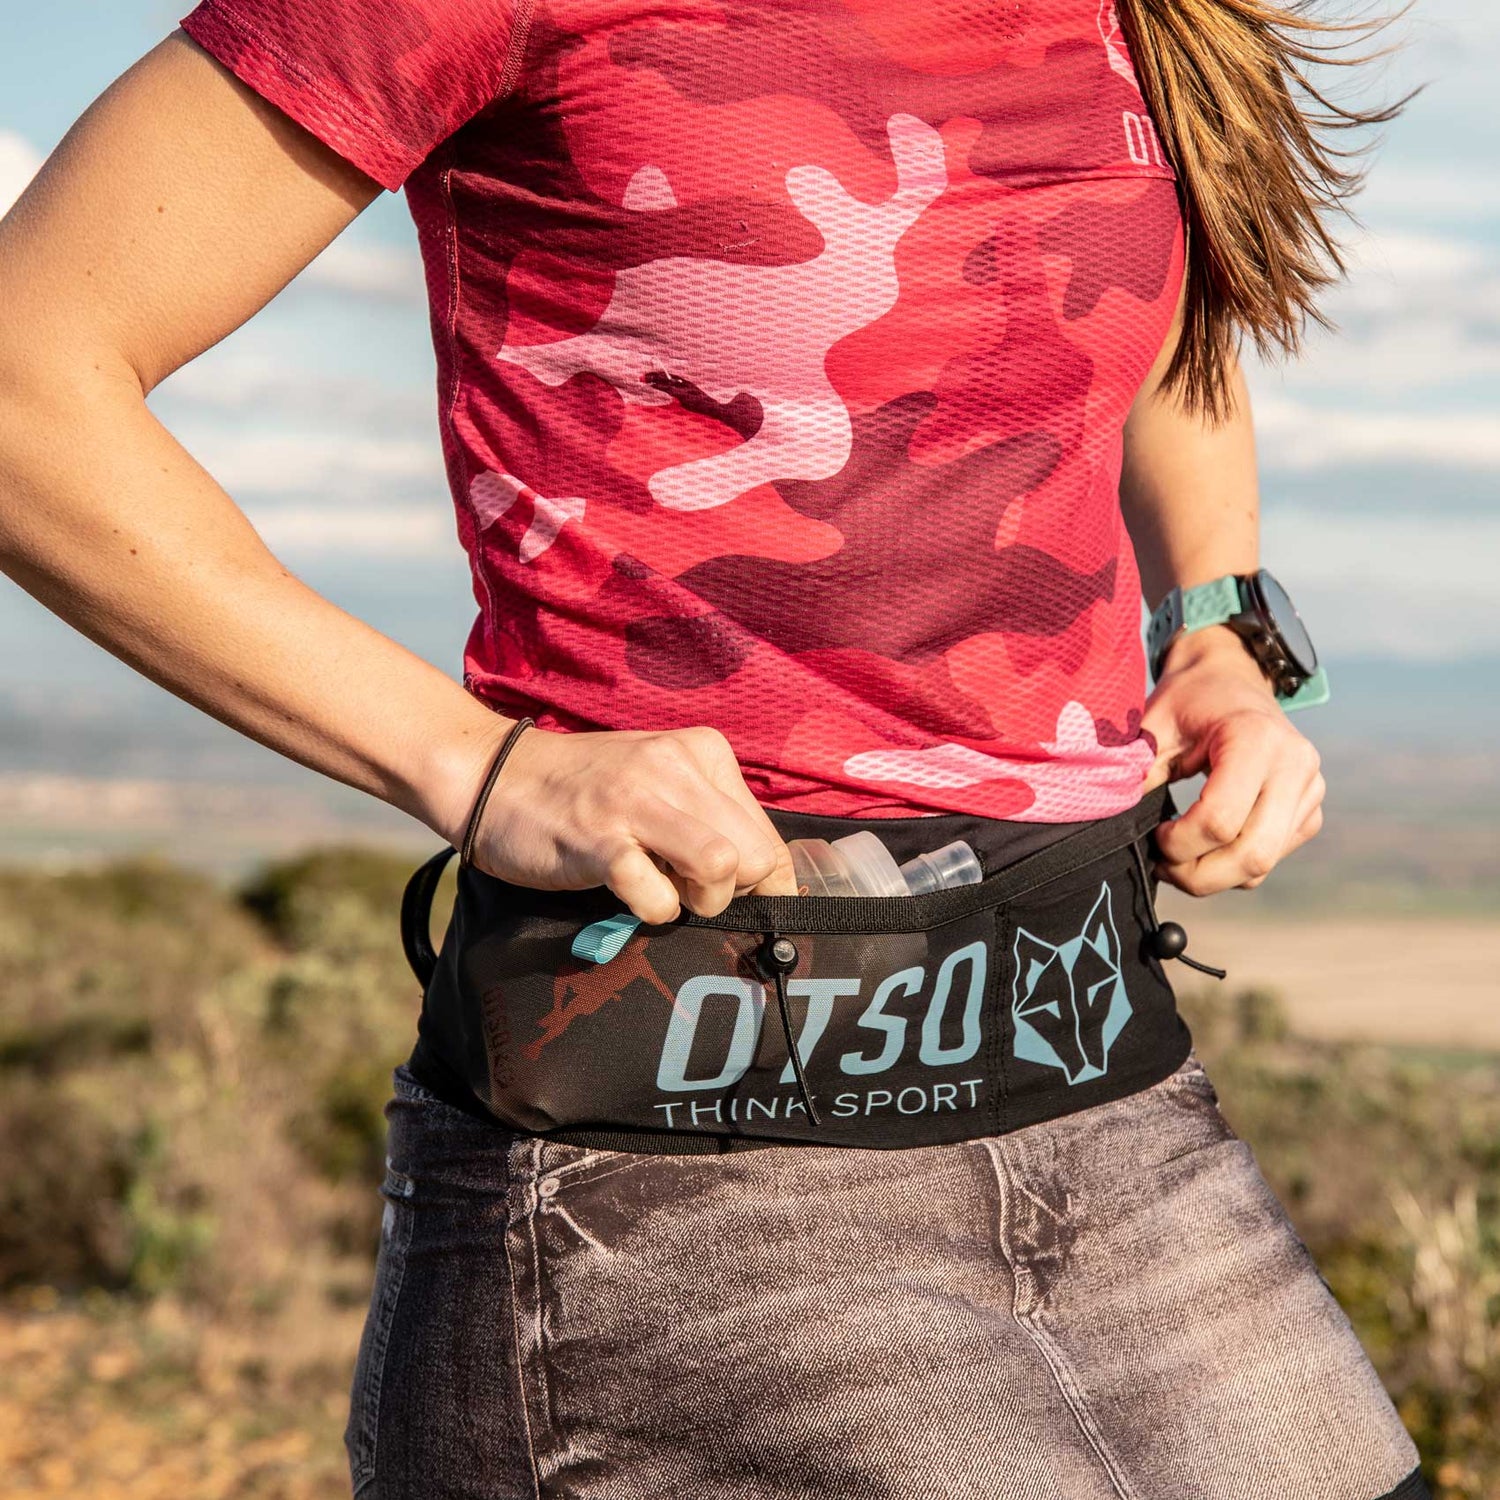 Running and trail running belts